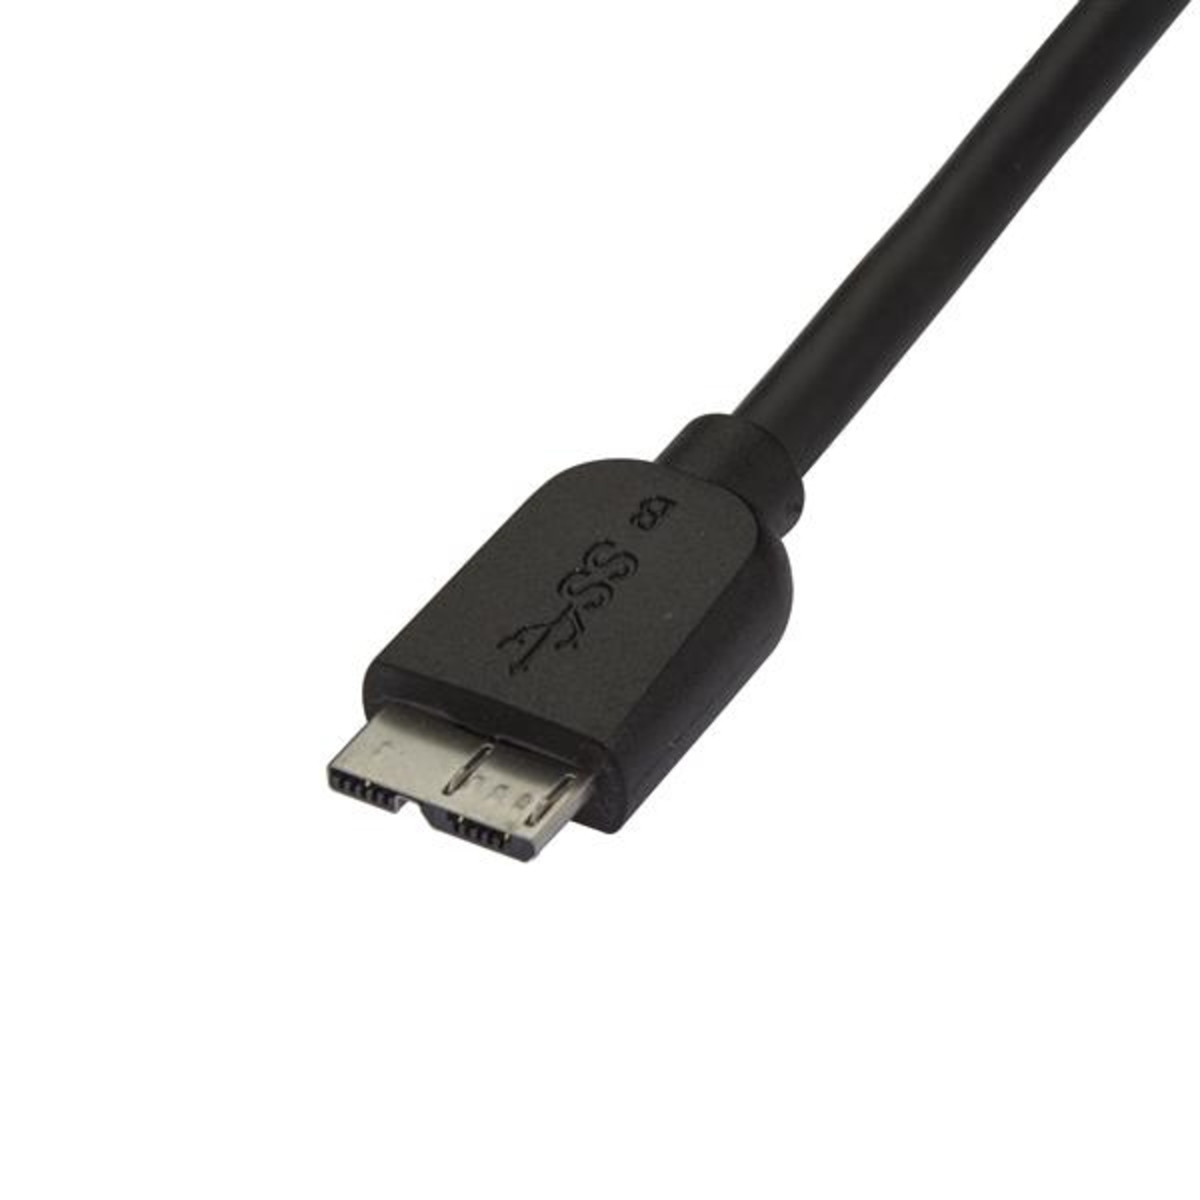 2m Slim SS USB 3.0 A to Micro B Cable